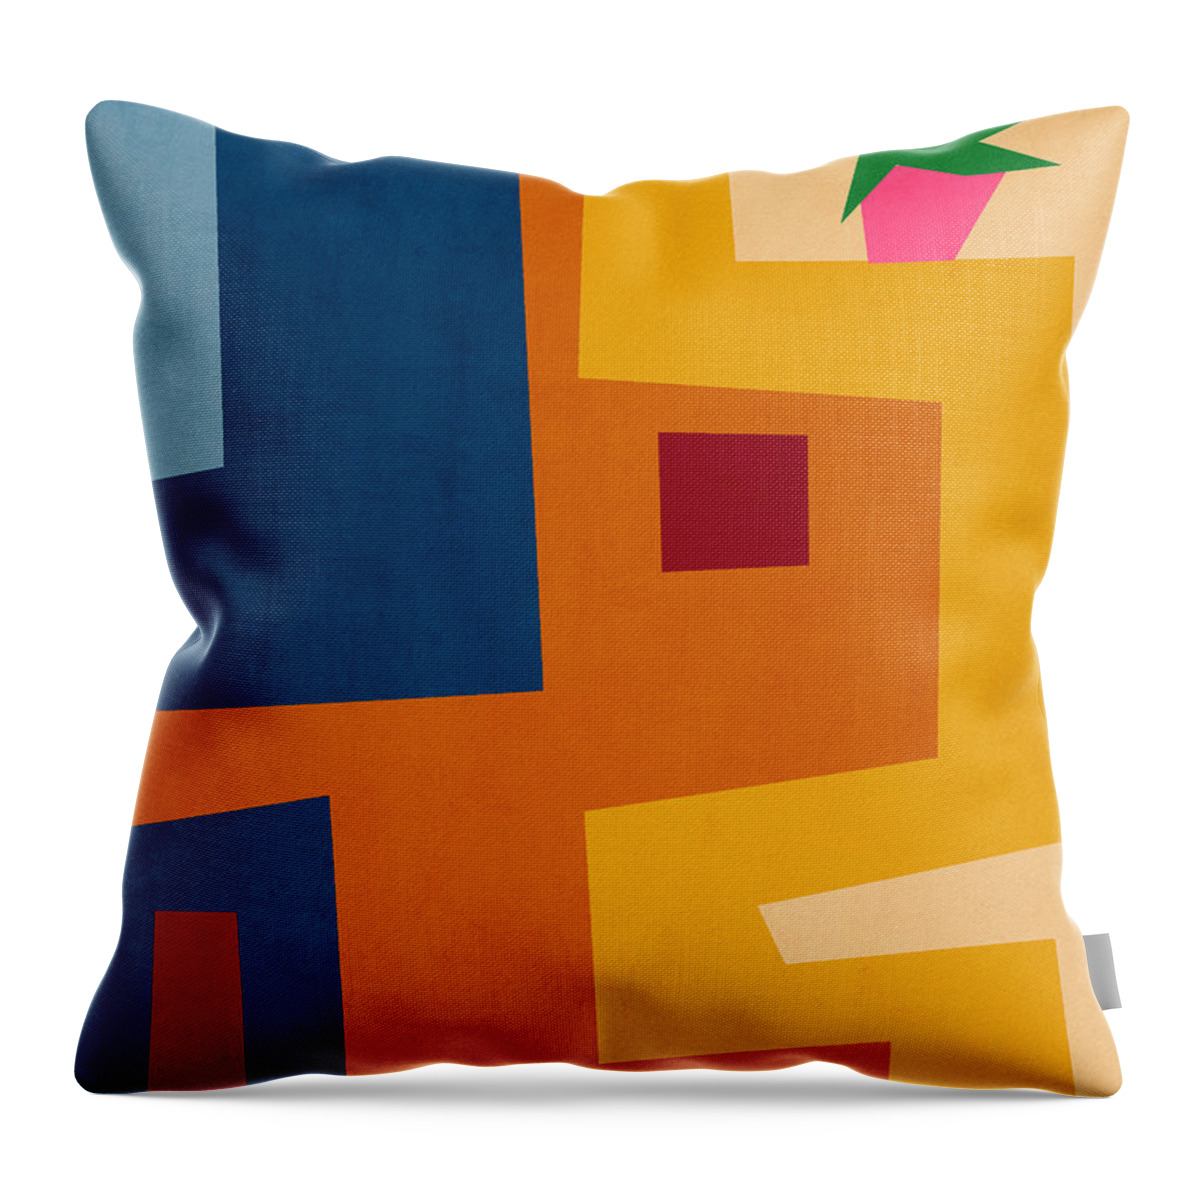 Modern Throw Pillow featuring the mixed media Colorful Geometric House 3- Art by Linda Woods by Linda Woods